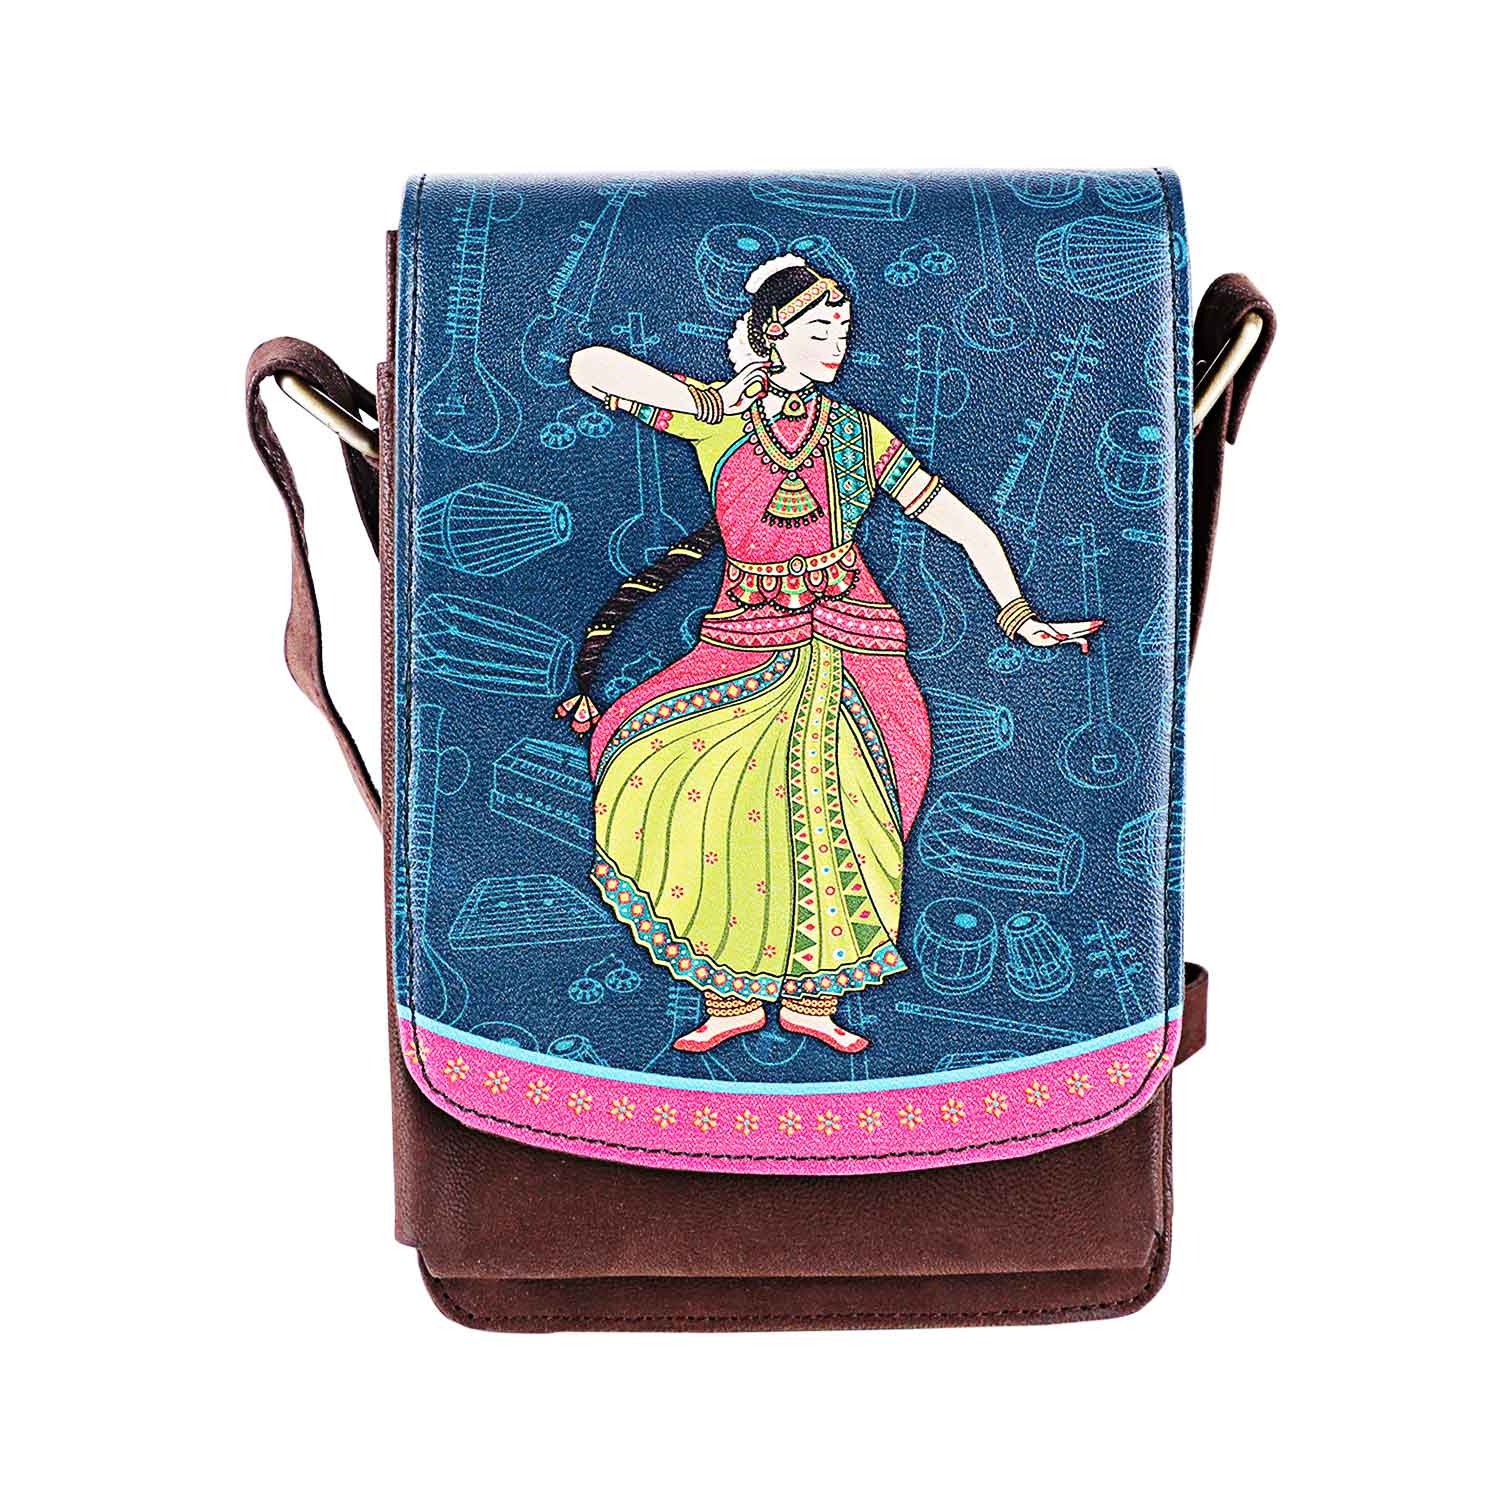 Buy All Things Sundar Women's Multipurpose Pouch P04-161 at Amazon.in